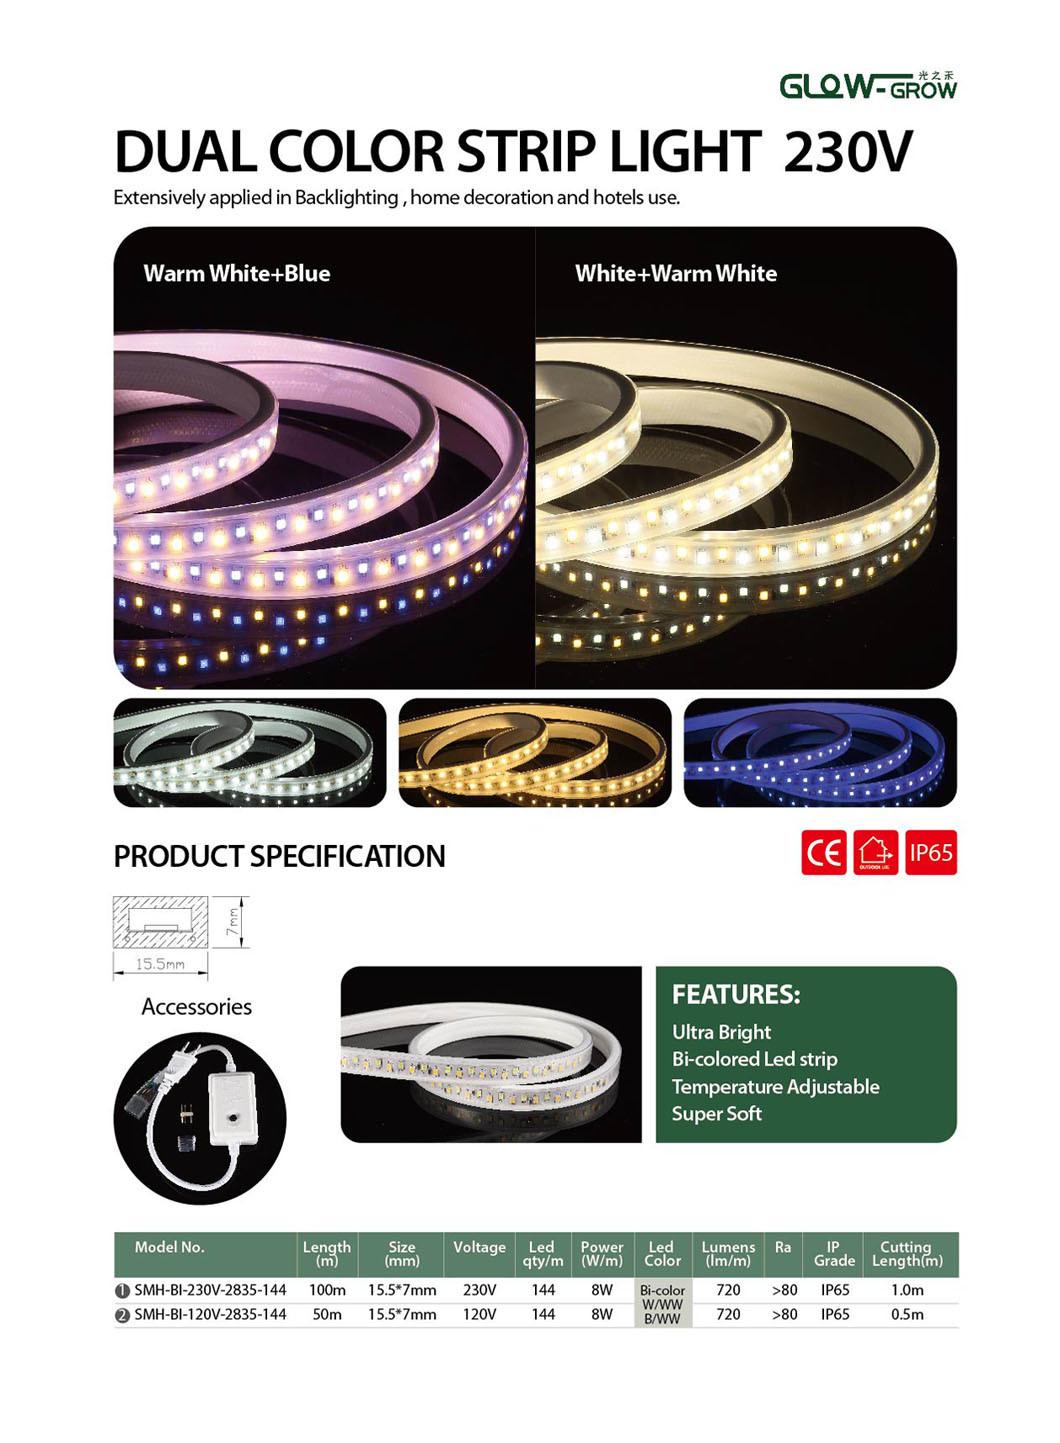 IP65 SMD 2835 LED Lights Flexible Strip Light with CE Approval